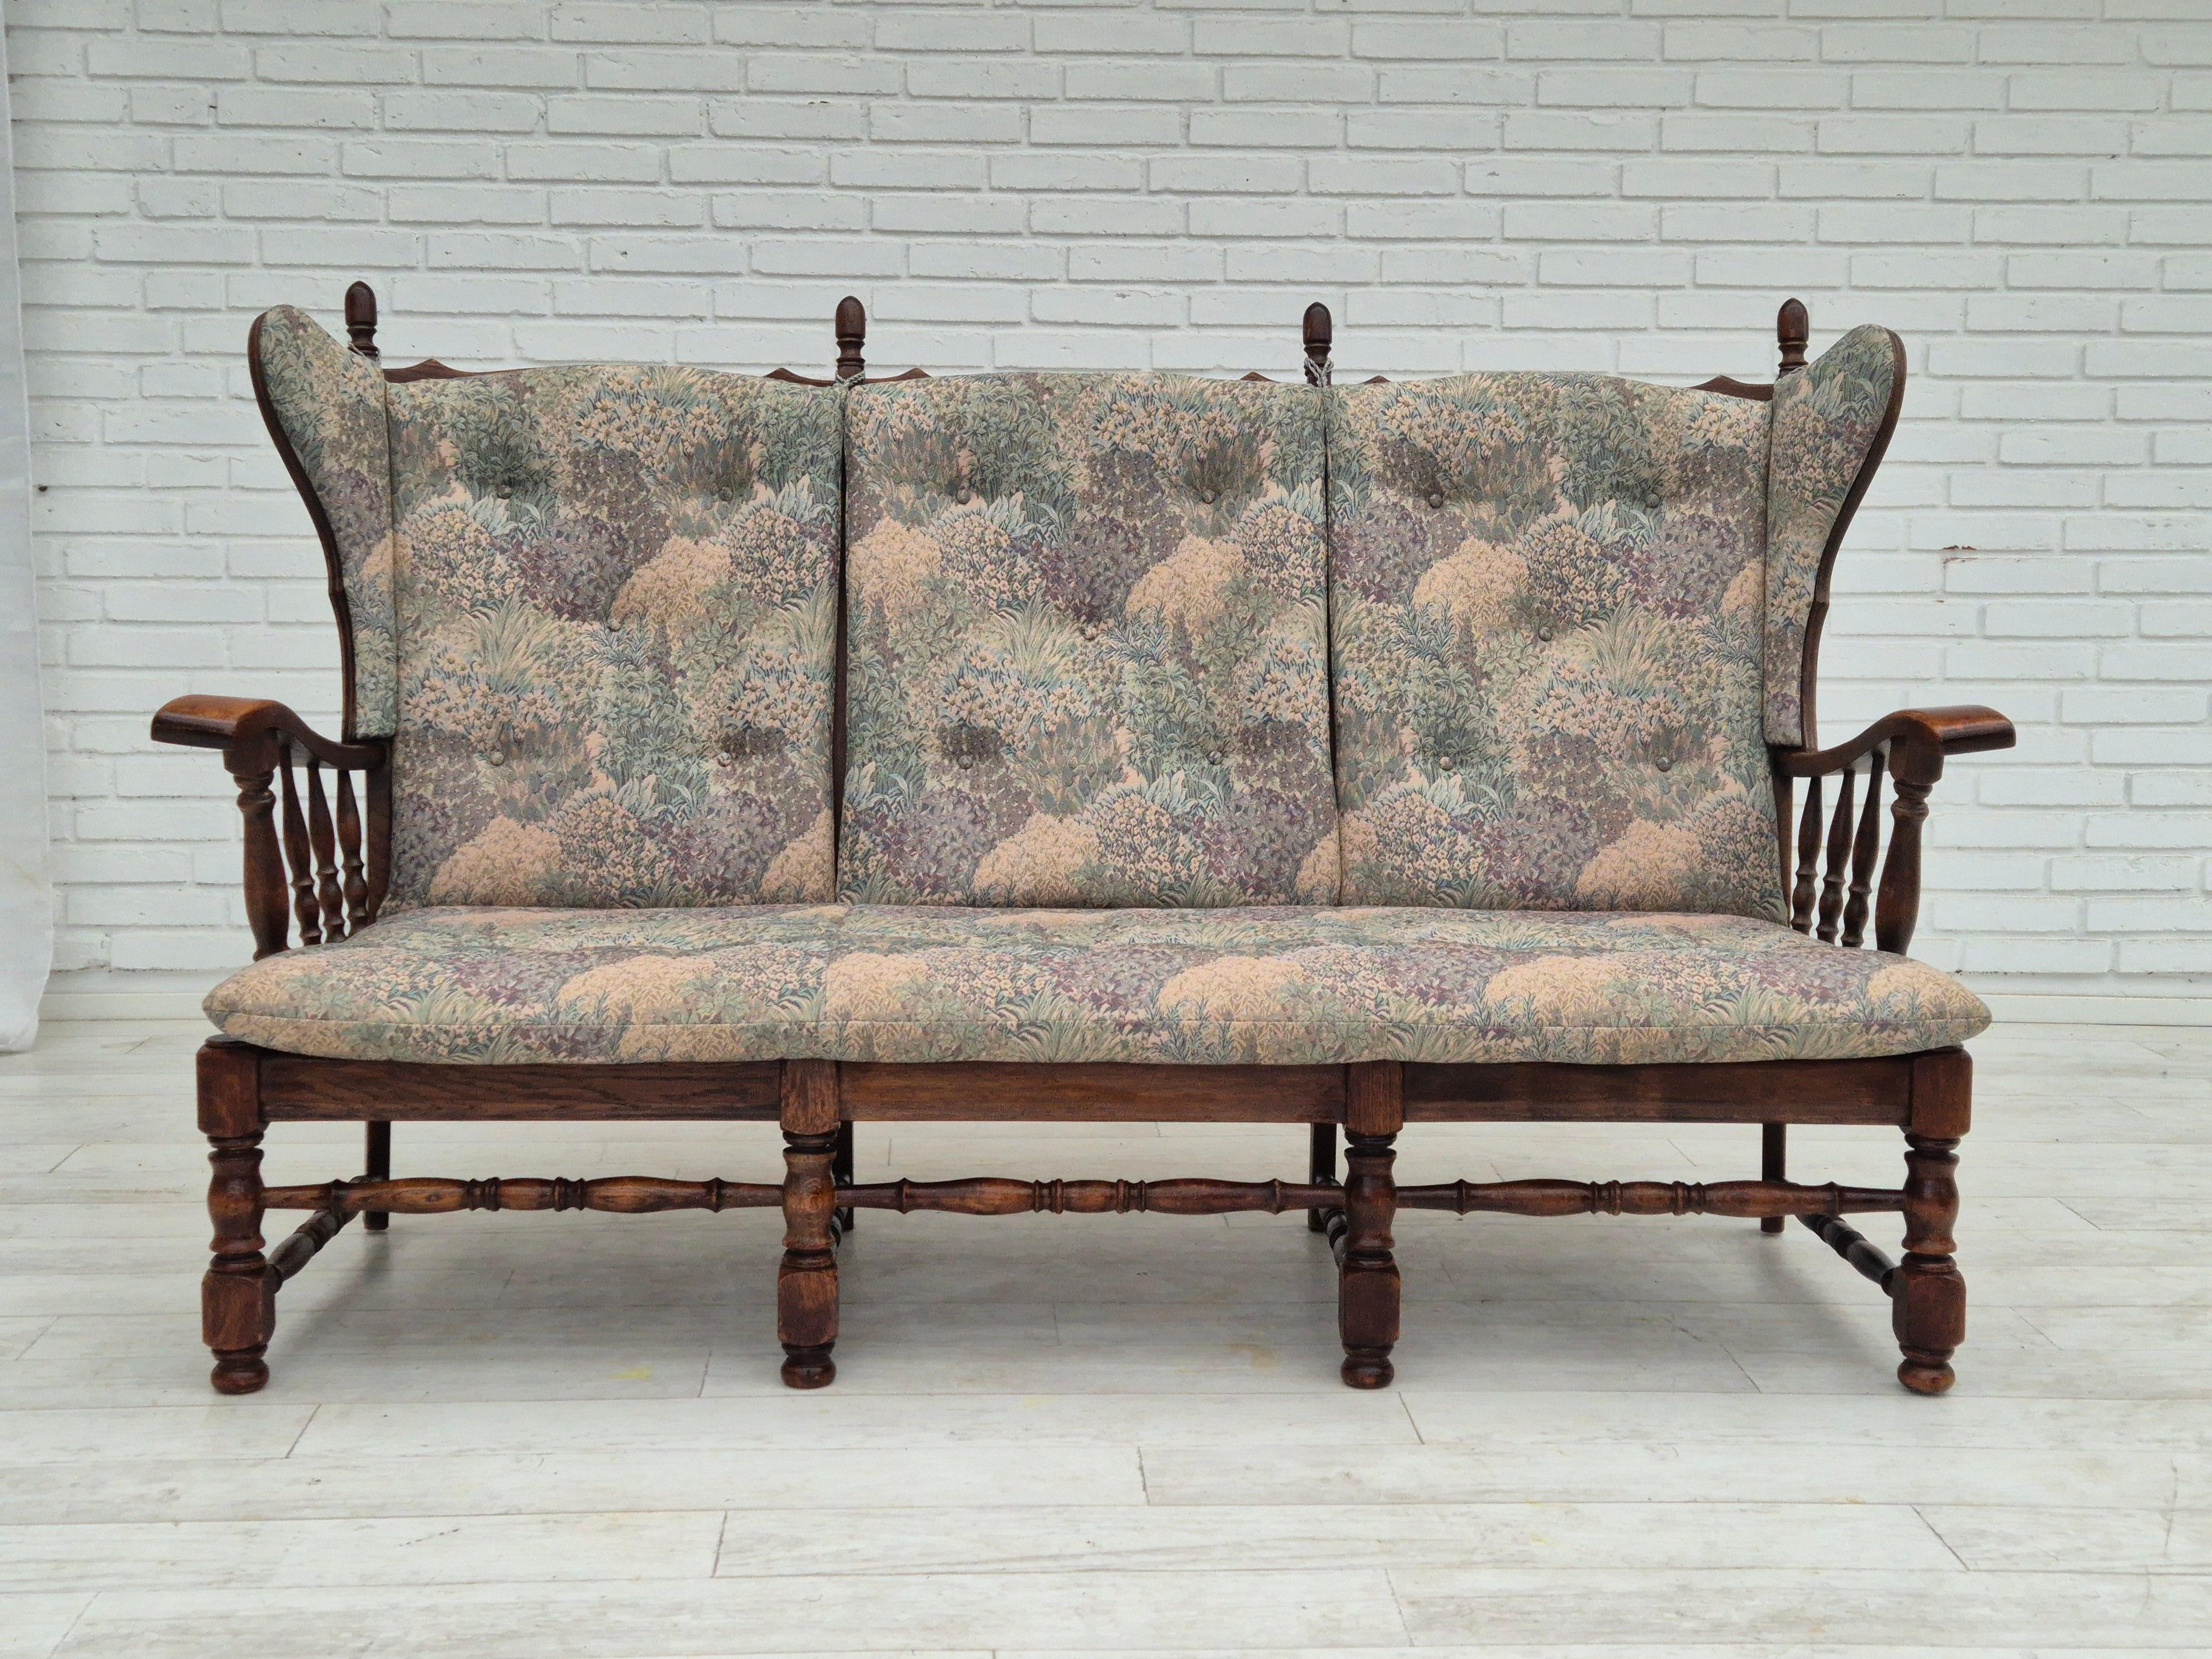 1960s, Danish design, 3 seater sofa by Regan Møbelfabrik, Aarhus. Original very good condition: no smells and no stains. Furniture multicolour fabric, oak wood. Manufactured by Danish furniture manufacturer in about 1960s. 